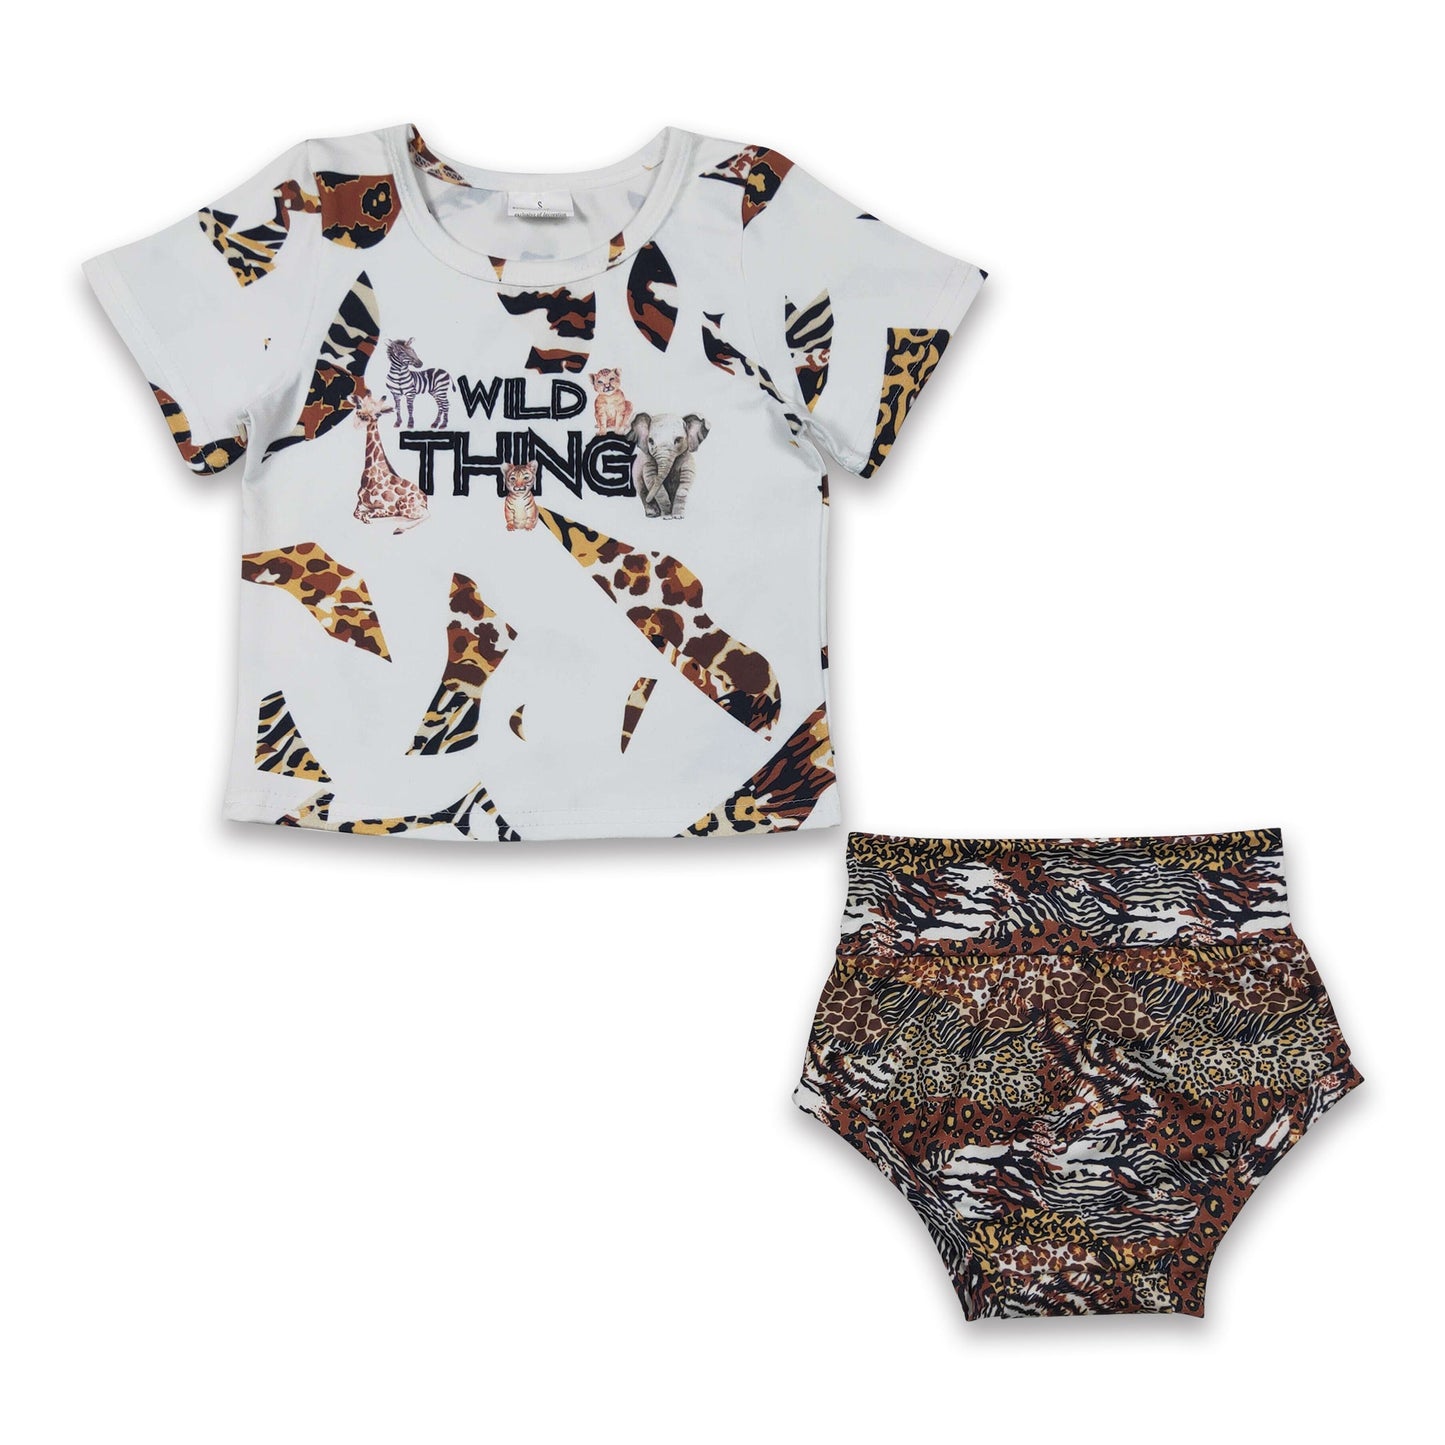 Wild thing animal top leopard bummies baby kids clothes